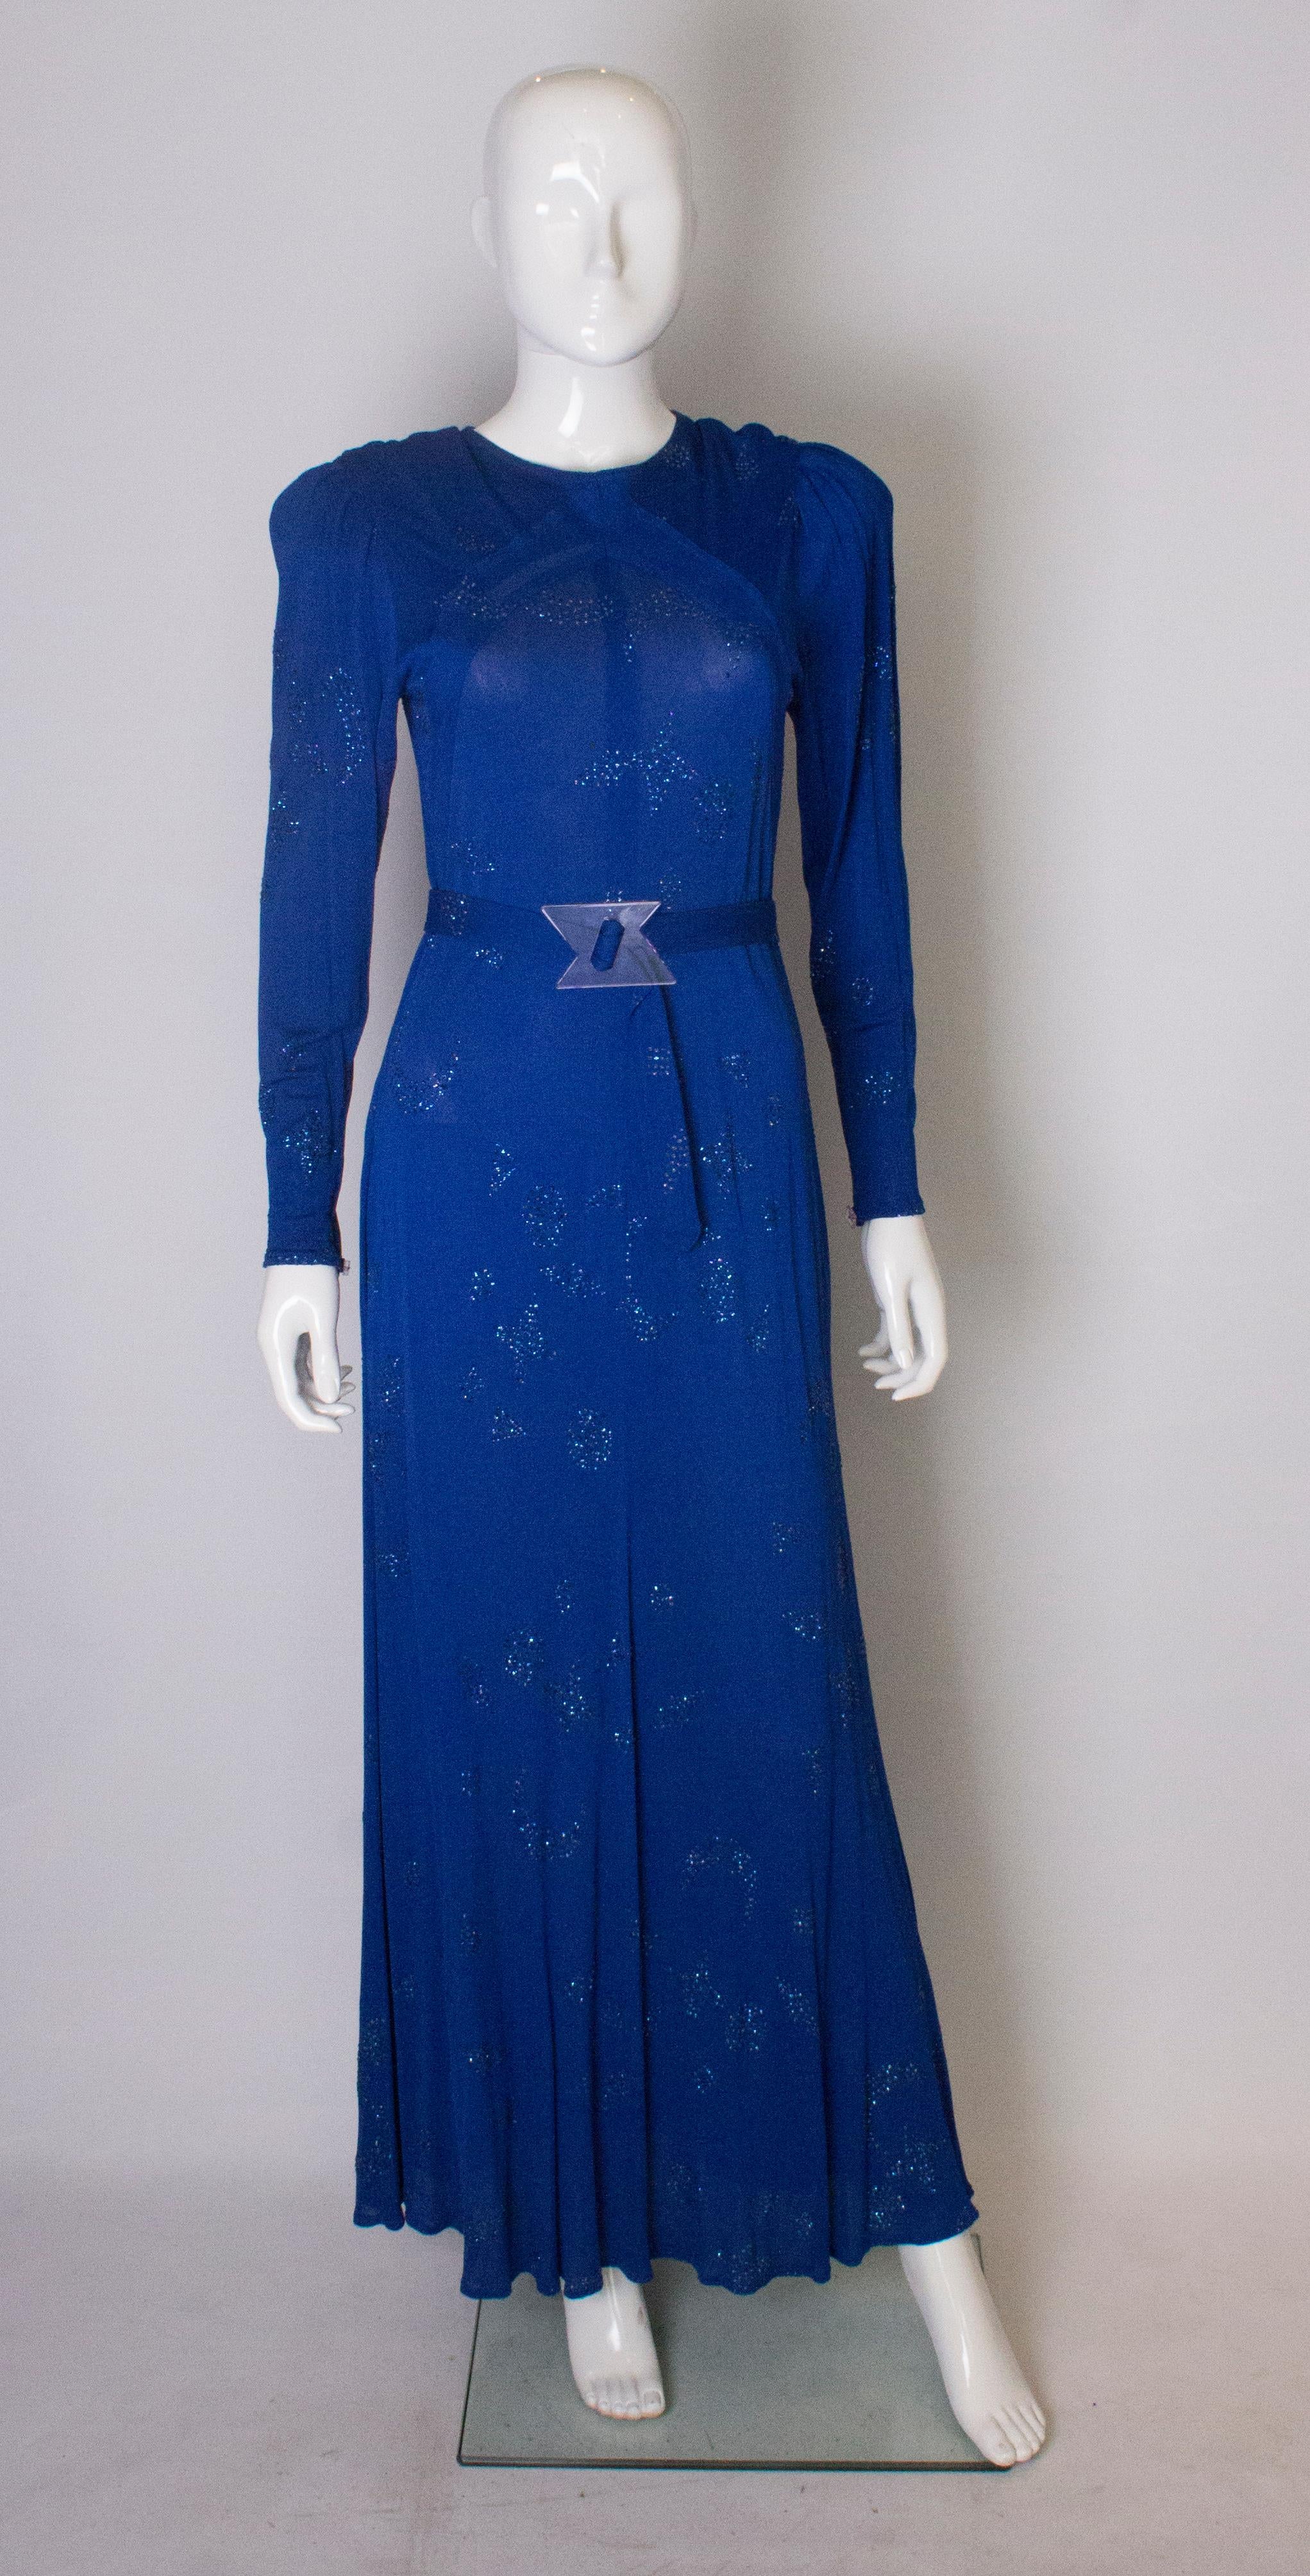 A chic statement dress from Jean Muir. The dress is in a stunning electric blue colour with a matching belt. with interesting buckle. It has a button opening at the back and is embellished all over with a stars and moon design.